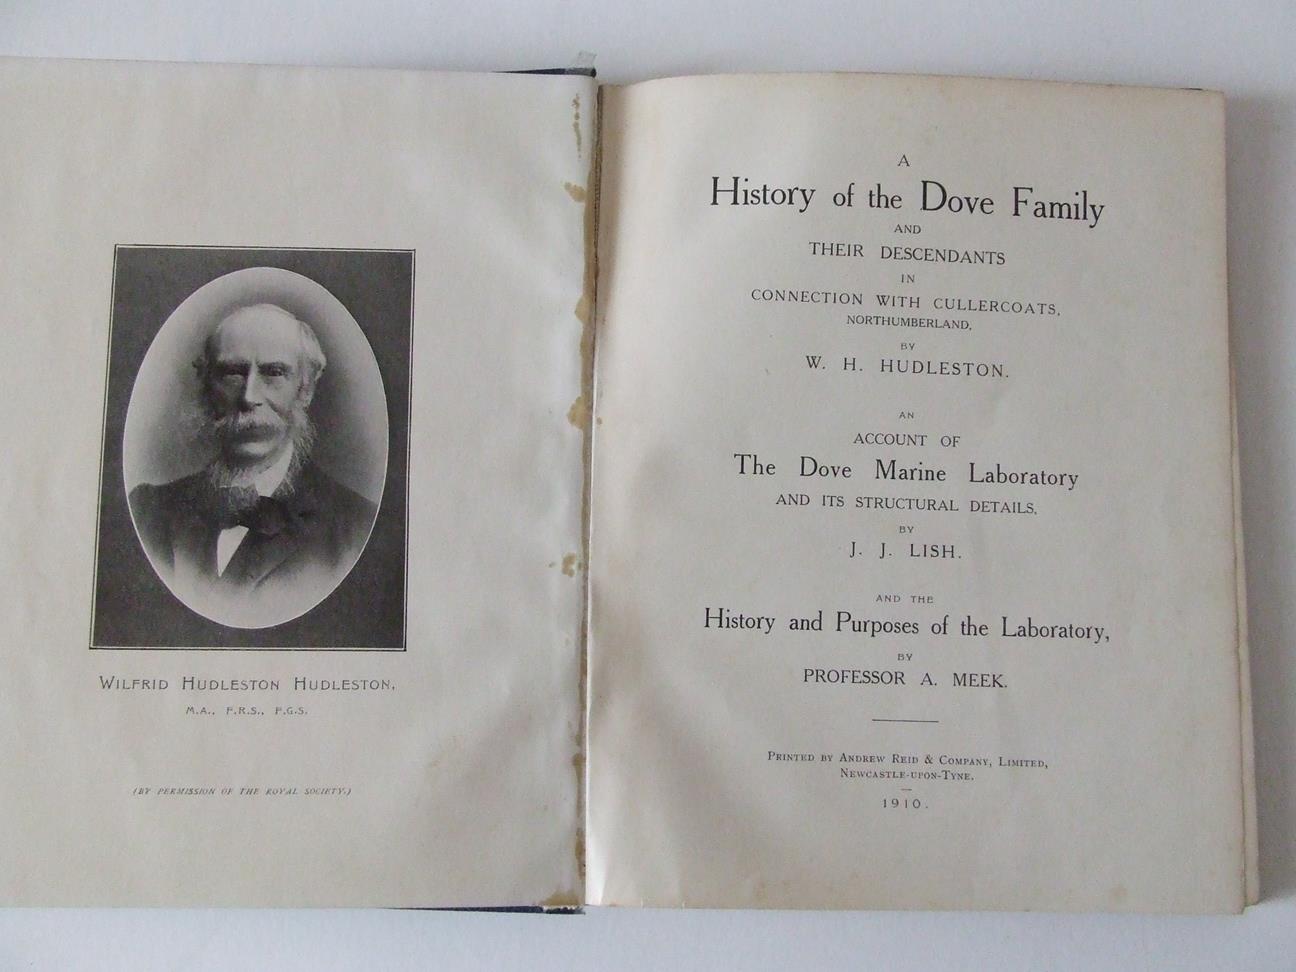 History of the Dove Family and their descendants in connection with Cullercoats, Northumberland